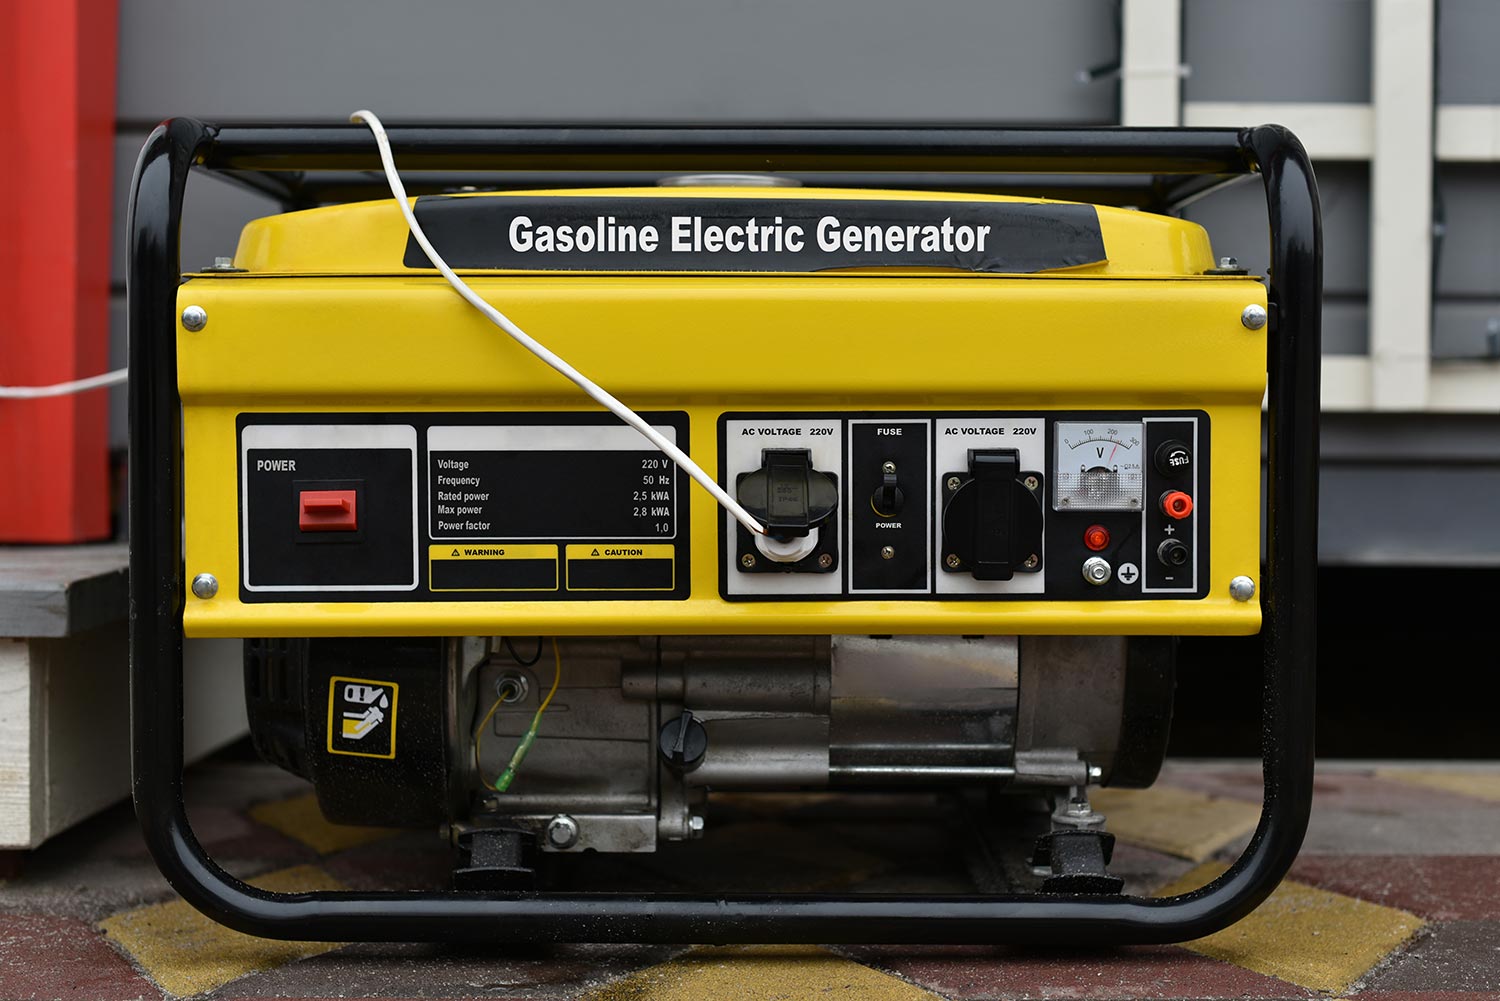 Gasoline electric generator connected to house to provide power